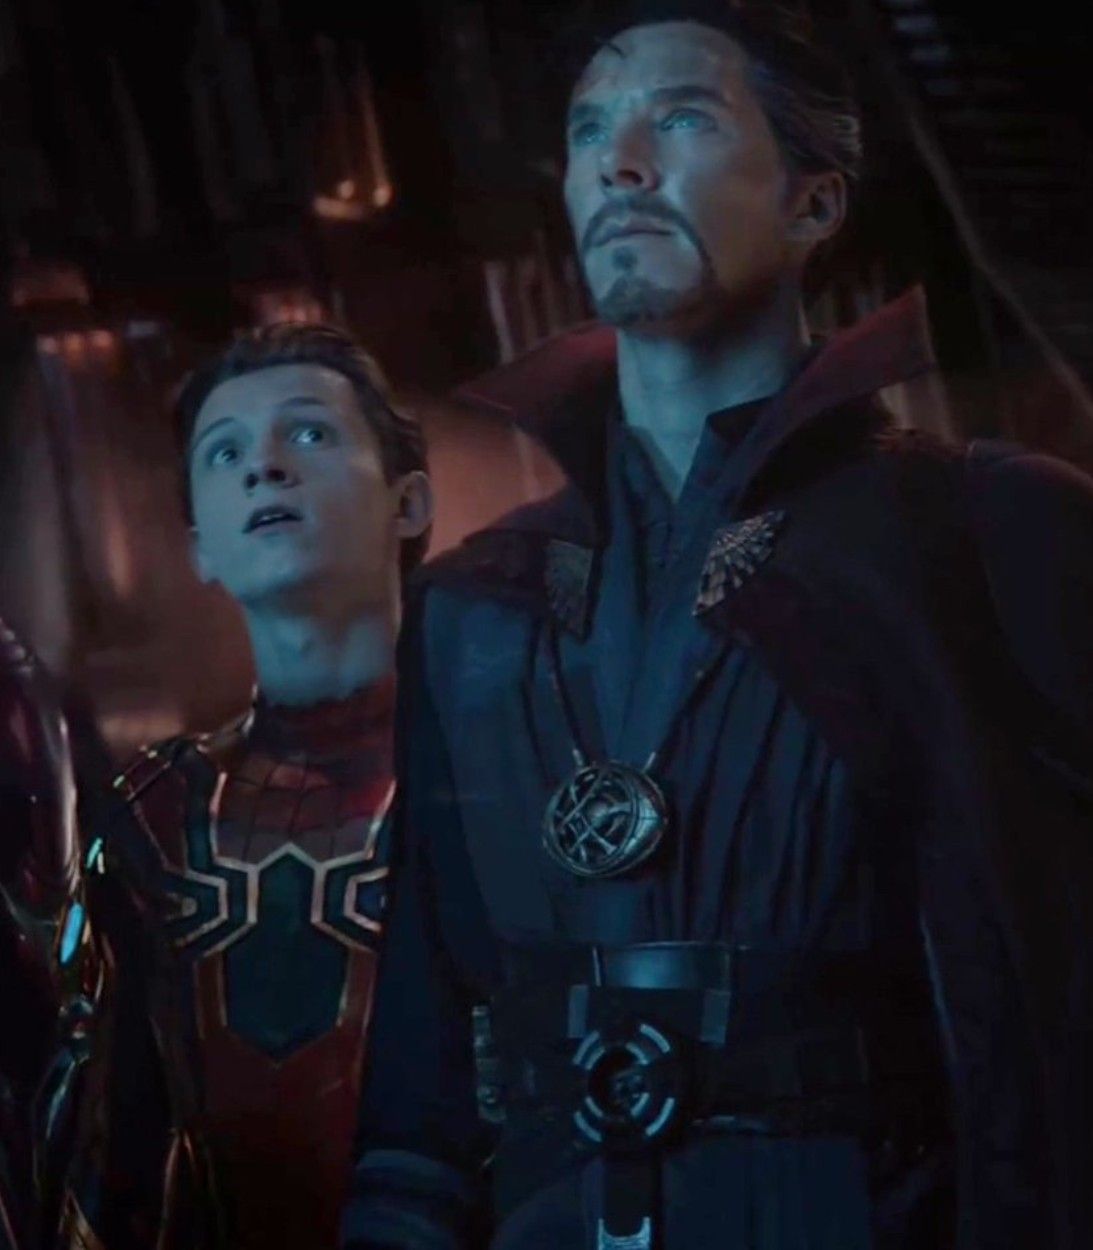 Spider-Man and Doctor Strange in Avengers Infinity War